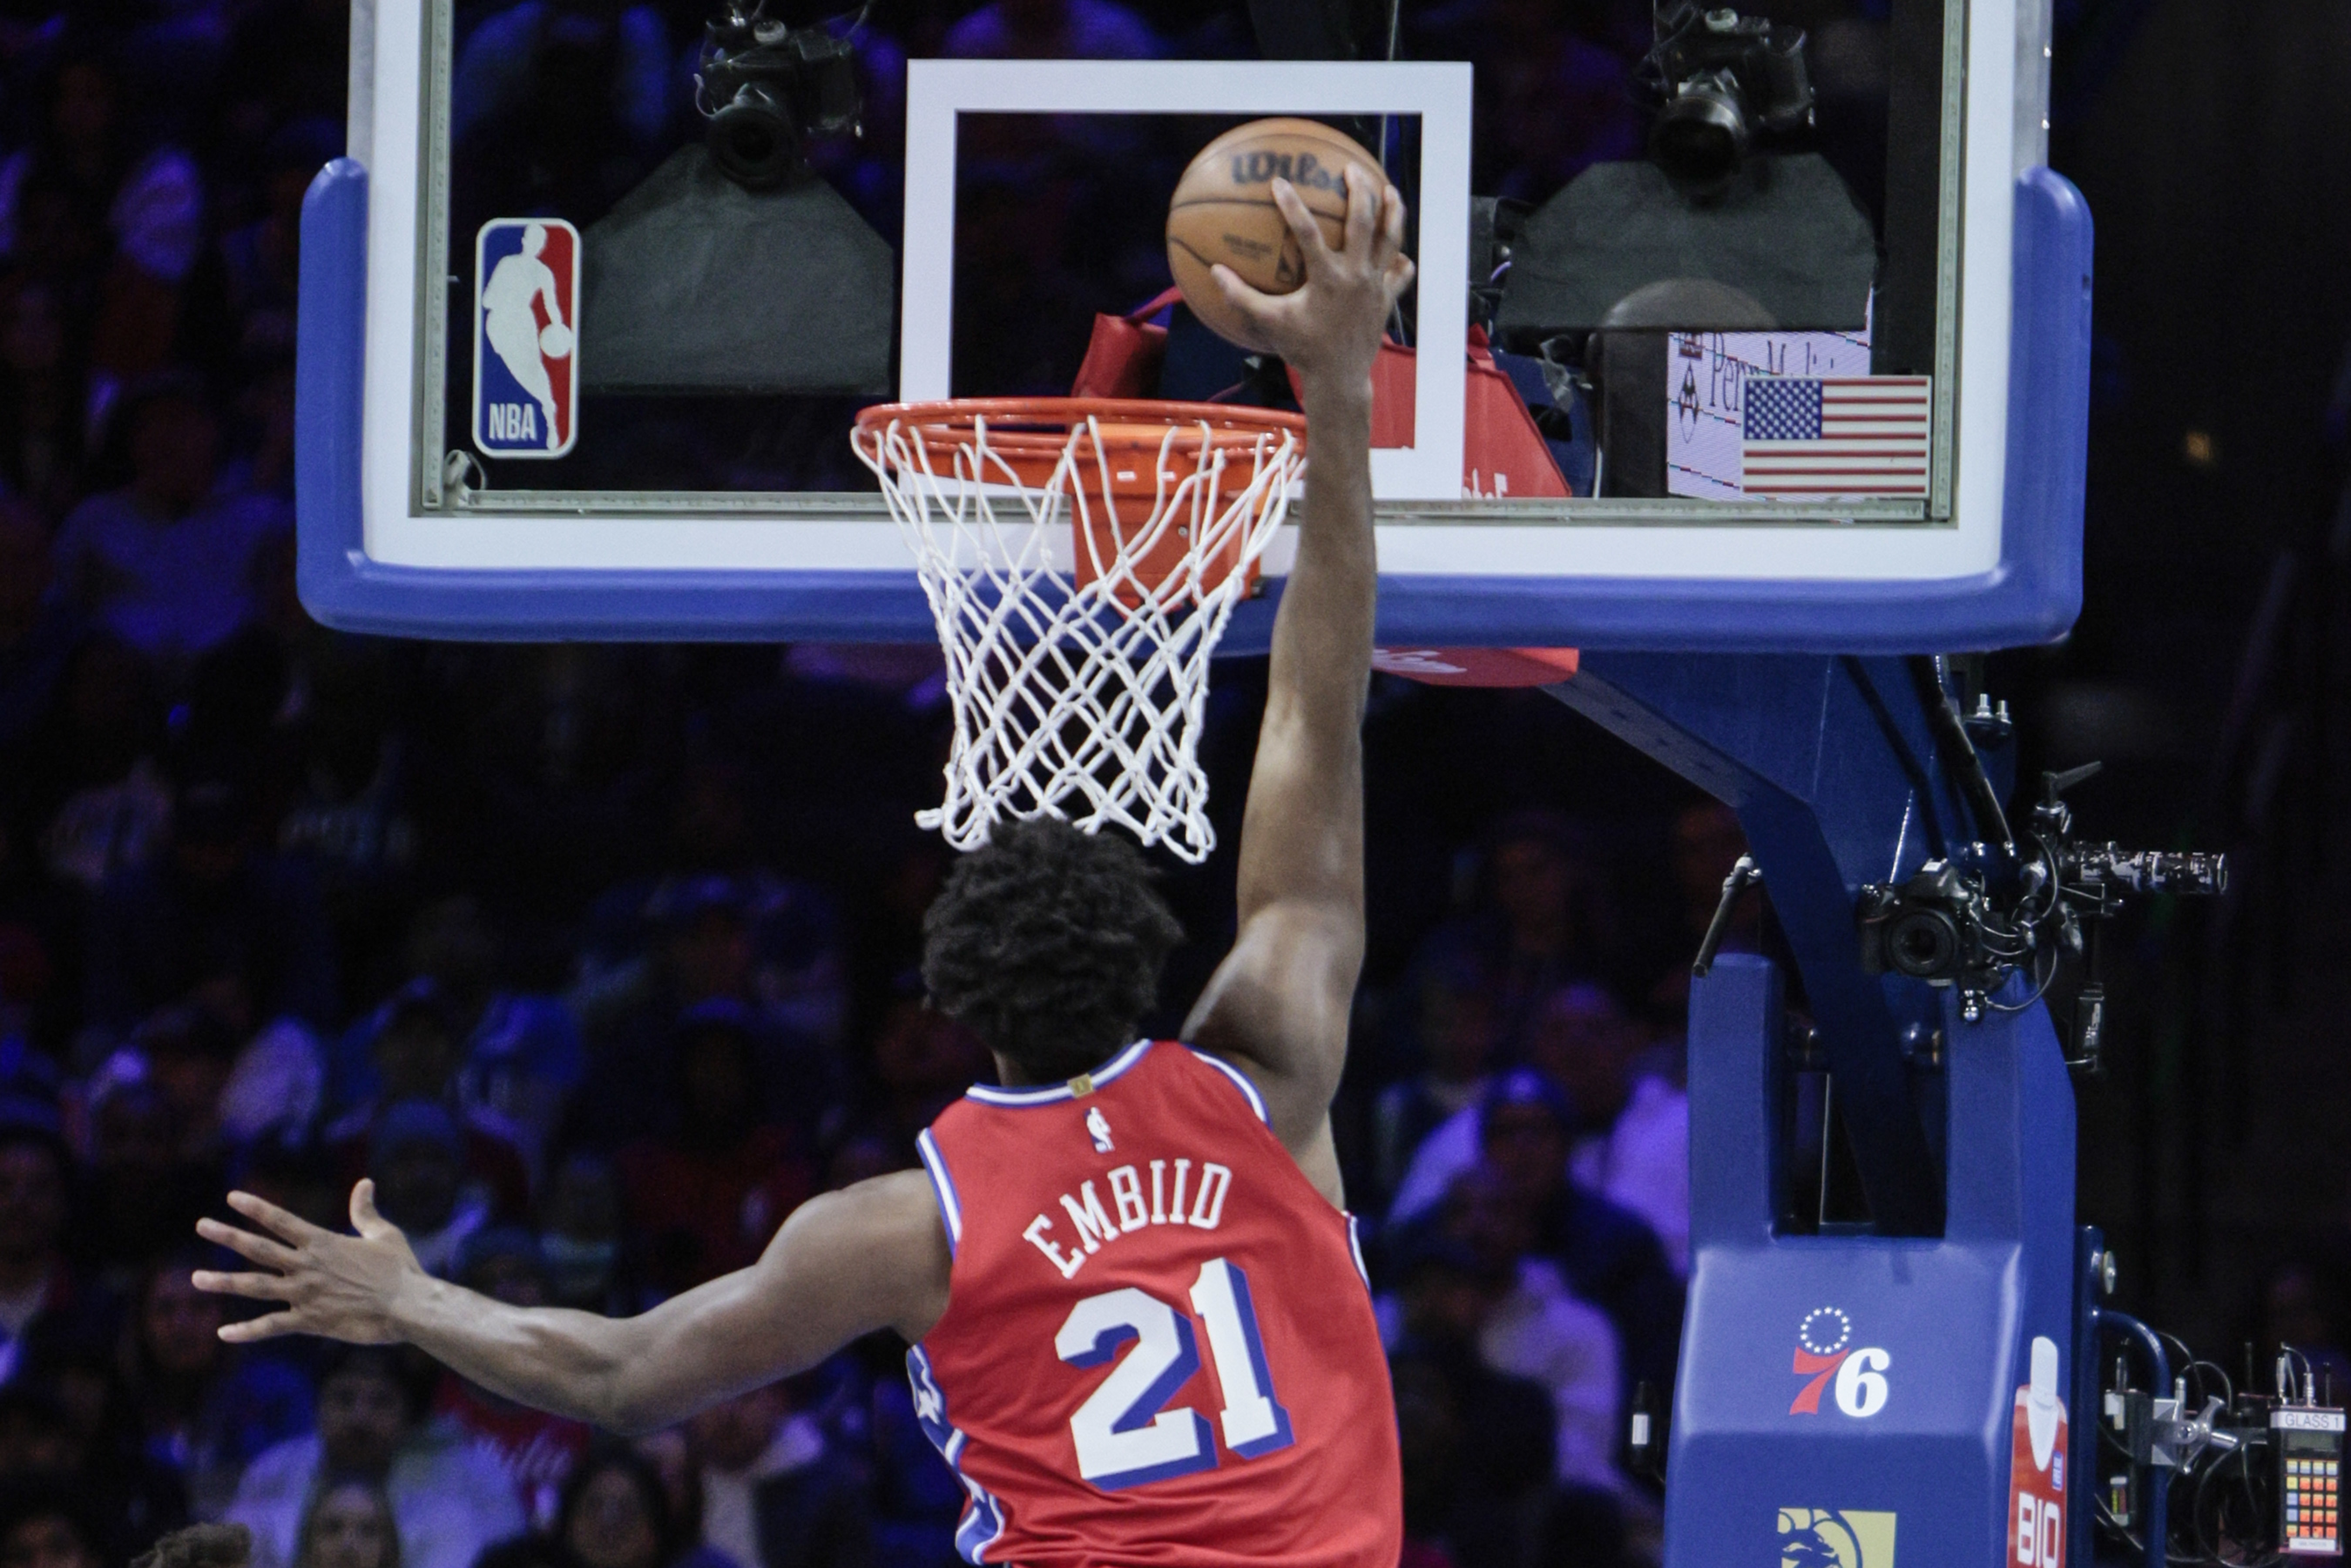 PHOTOS » Trail Blazers vs Sixers on March 10, 2023 Photo Gallery